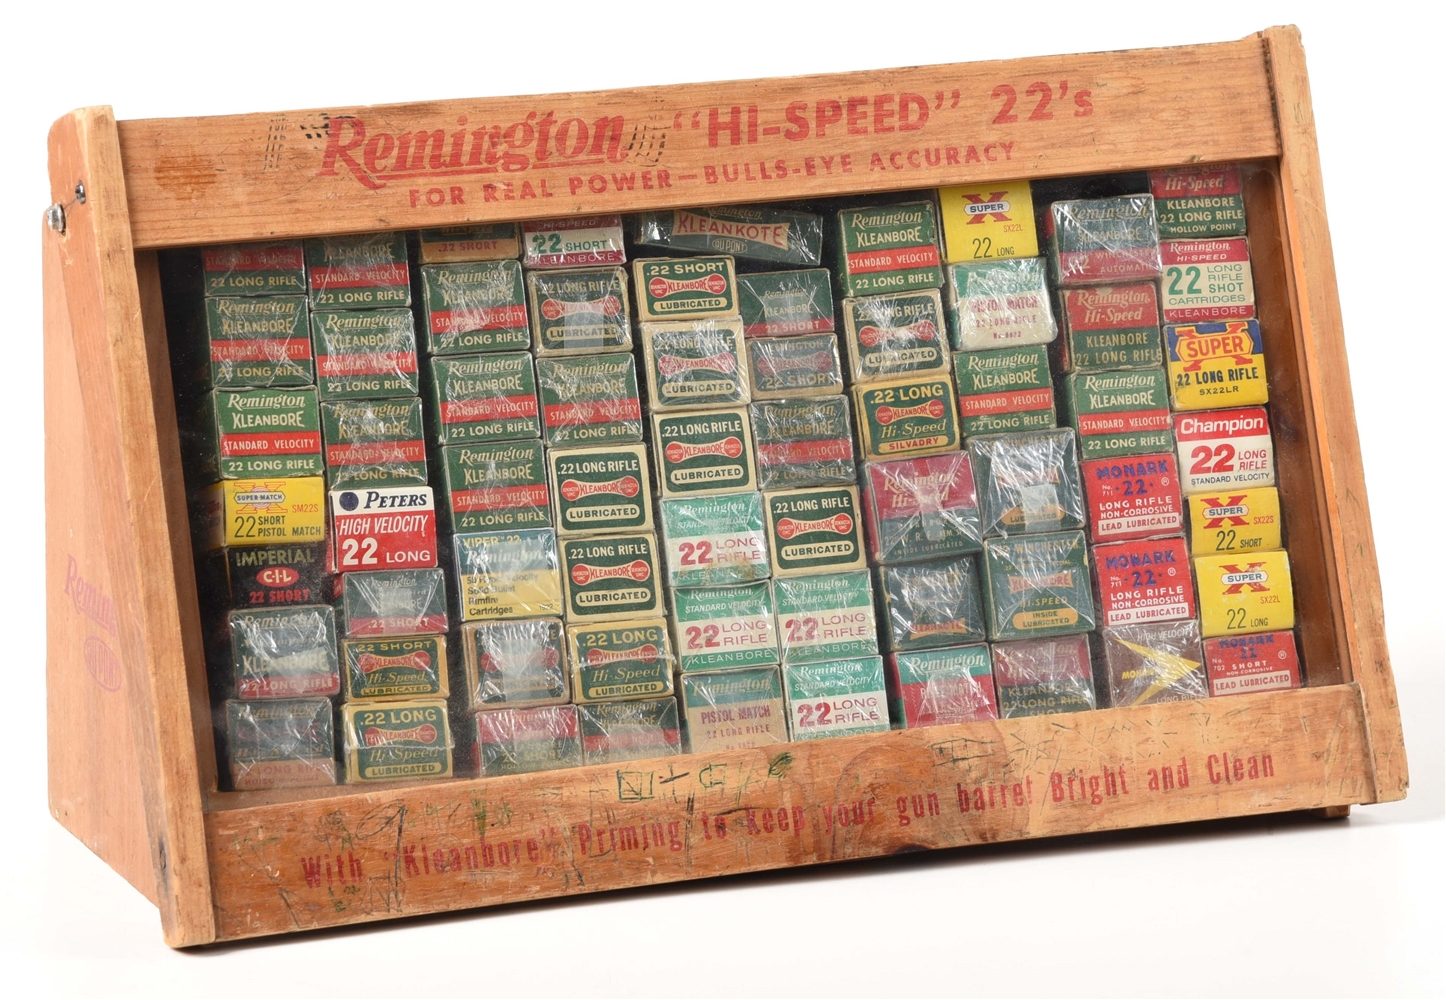 REMINGTON HI-SPEED .22 COUNTERTOP DISPLAY STOCKED WITH COLLECTIBLE AMMUNITION.